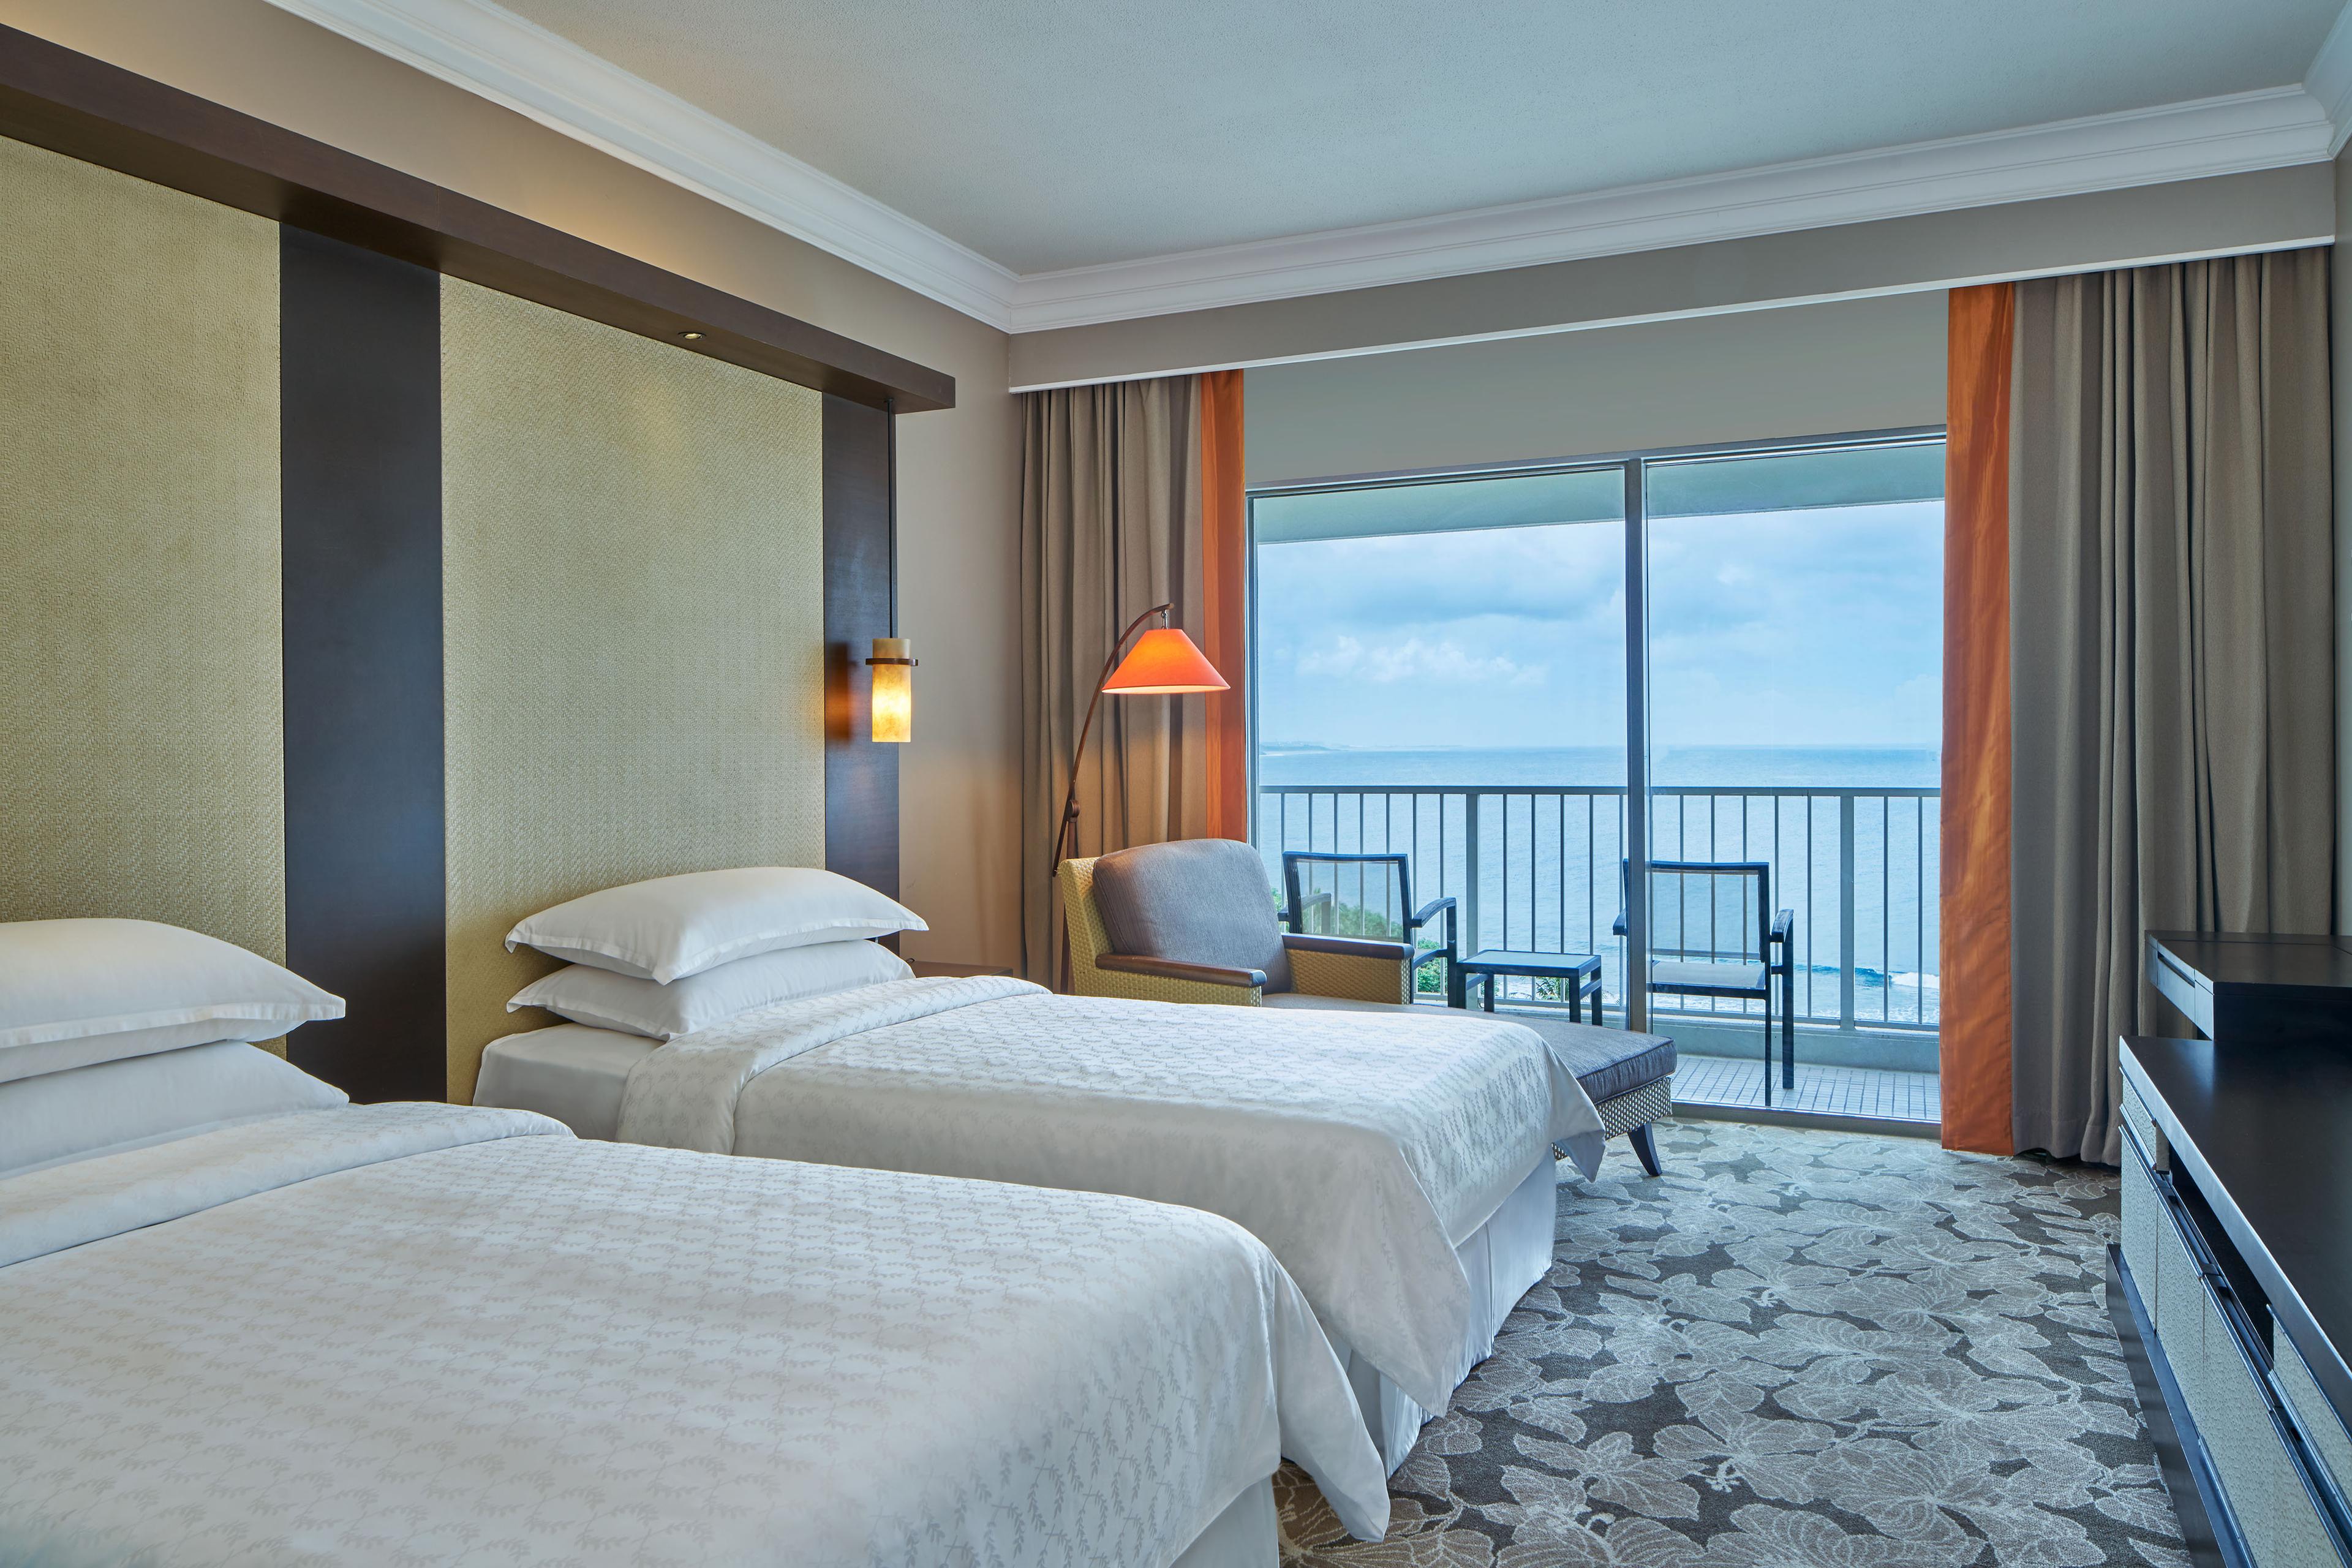 Our rooms feature our Sheraton Signature Beds, a flat screen TV of a minimum of 40inch, high-speed internet access, a mini-bar that includes complimentary beverages including beer, soft drinks, juice and mineral water upon arrival and a balcony where guests can enjoy Guam's beautiful sunset.